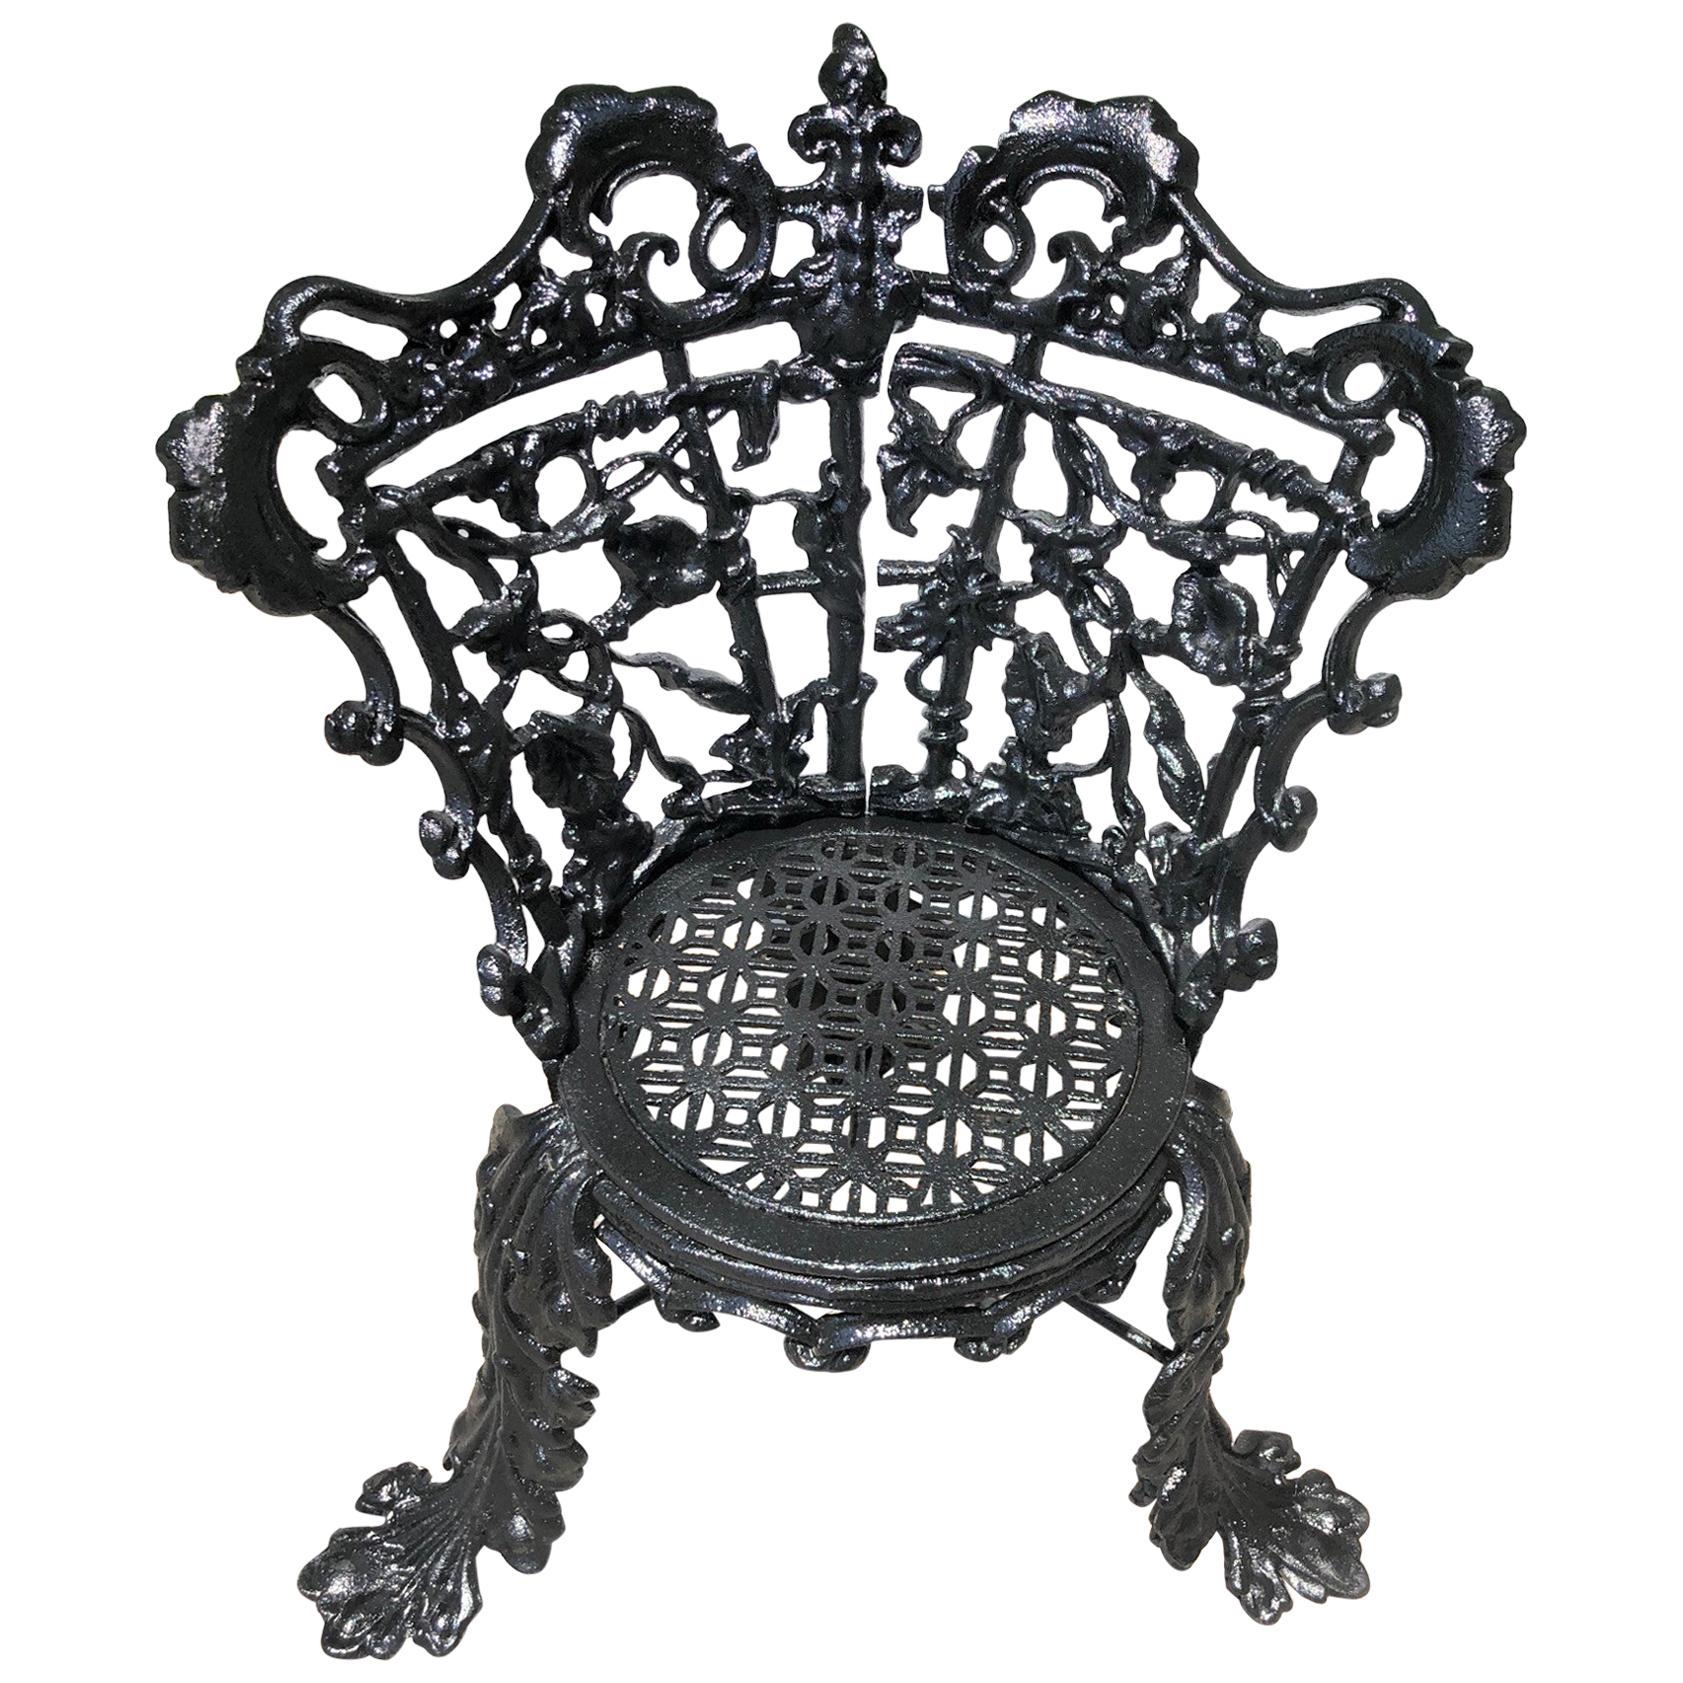 Cast Iron Garden Chair in the Morning Glory Pattern